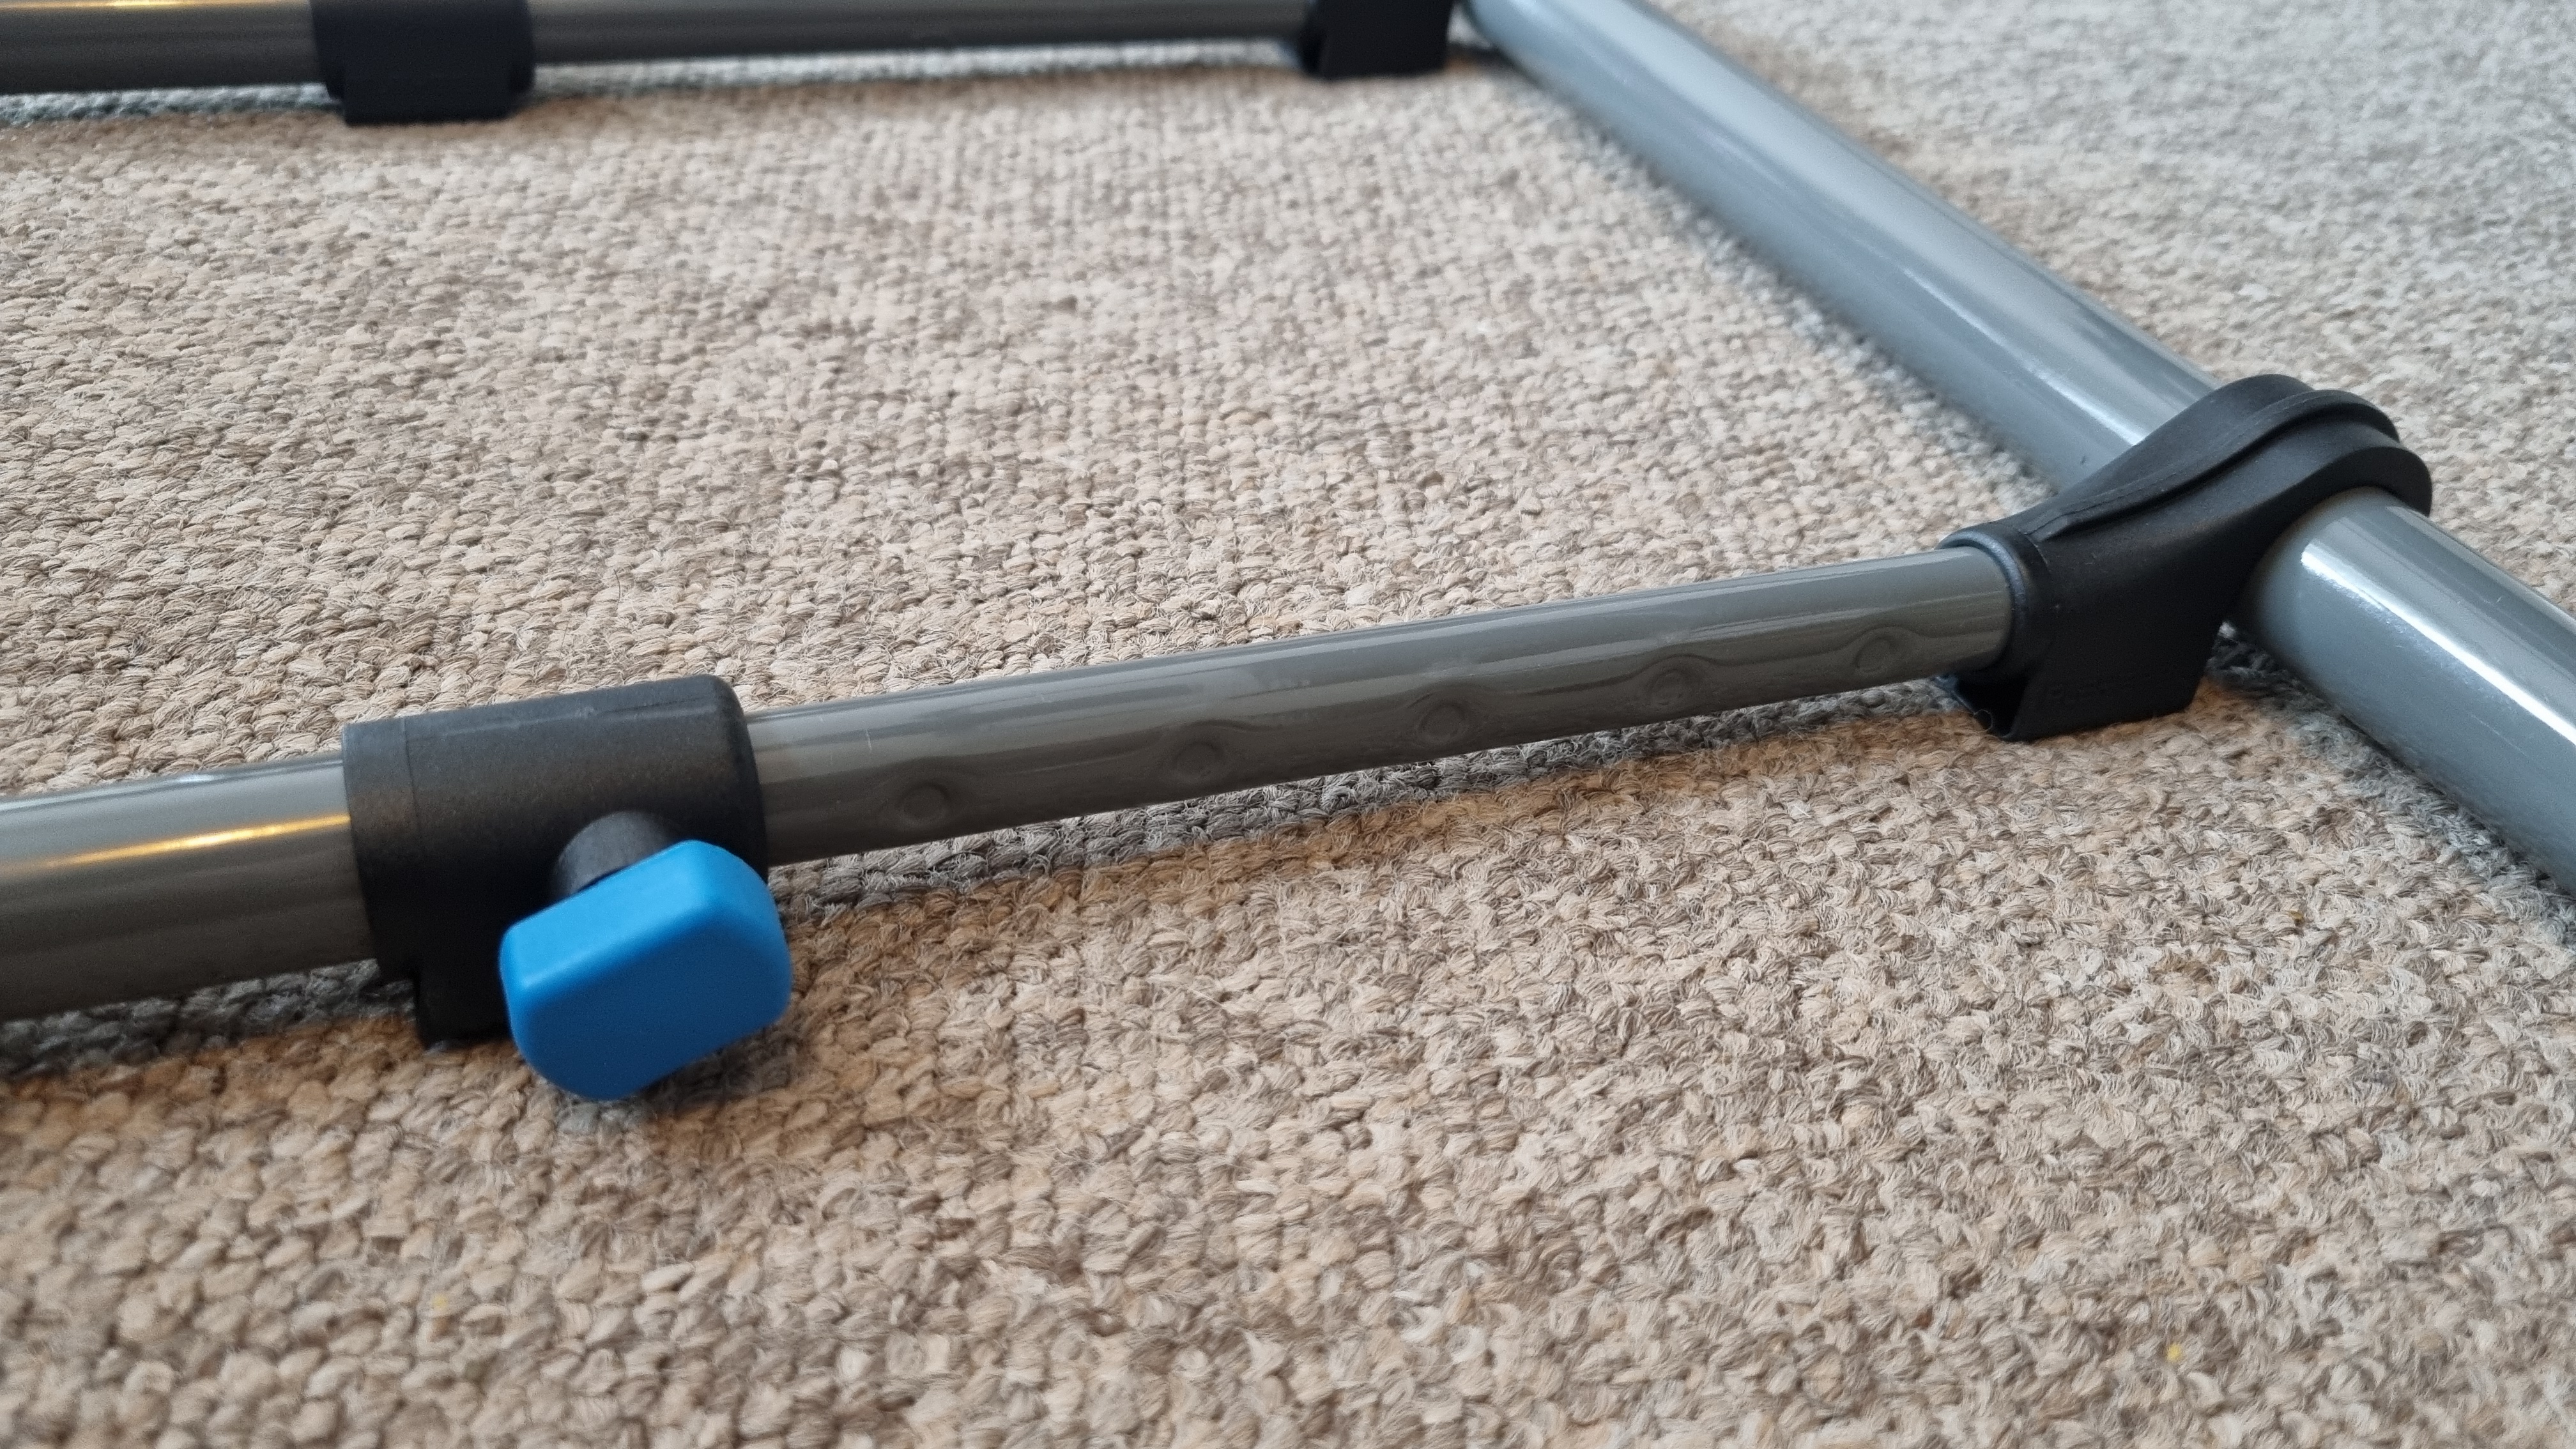 The adjustable pedal distance locking sliders on the Logitech Playseat Challenge X